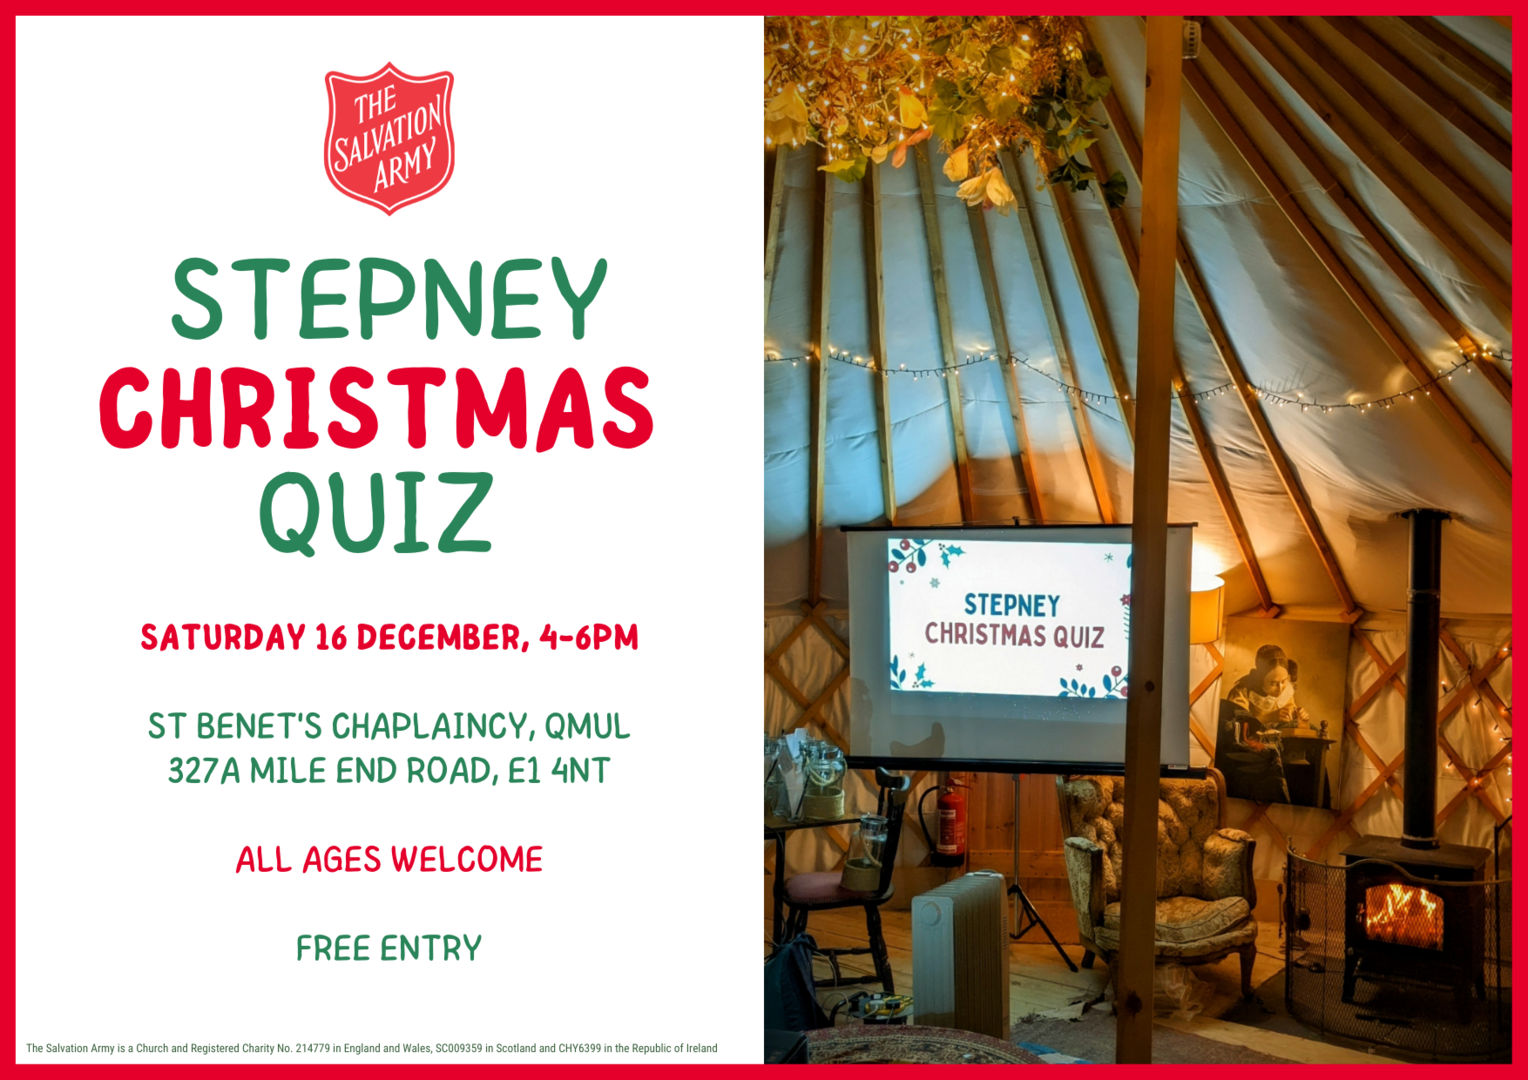 Advert for Christmas Quiz on 16 December at 4pm